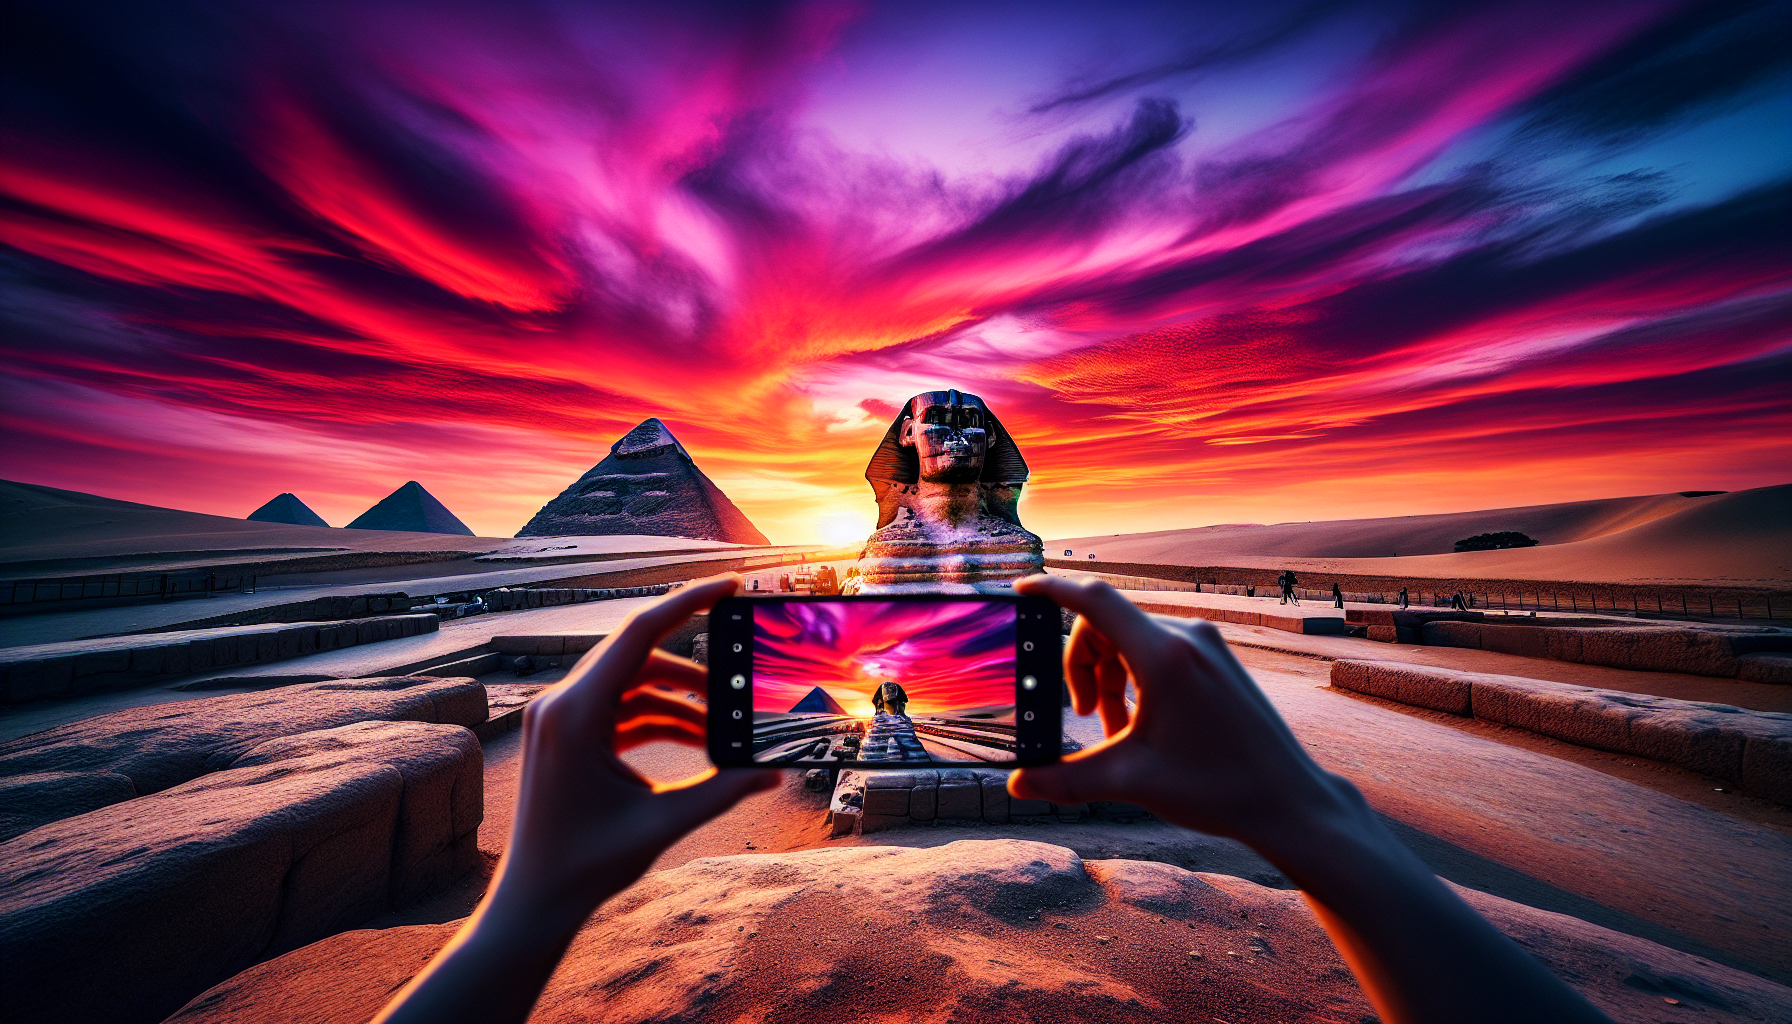 experience the most breathtaking sunset at the great sphinx ever captured on camera in this stunning video.